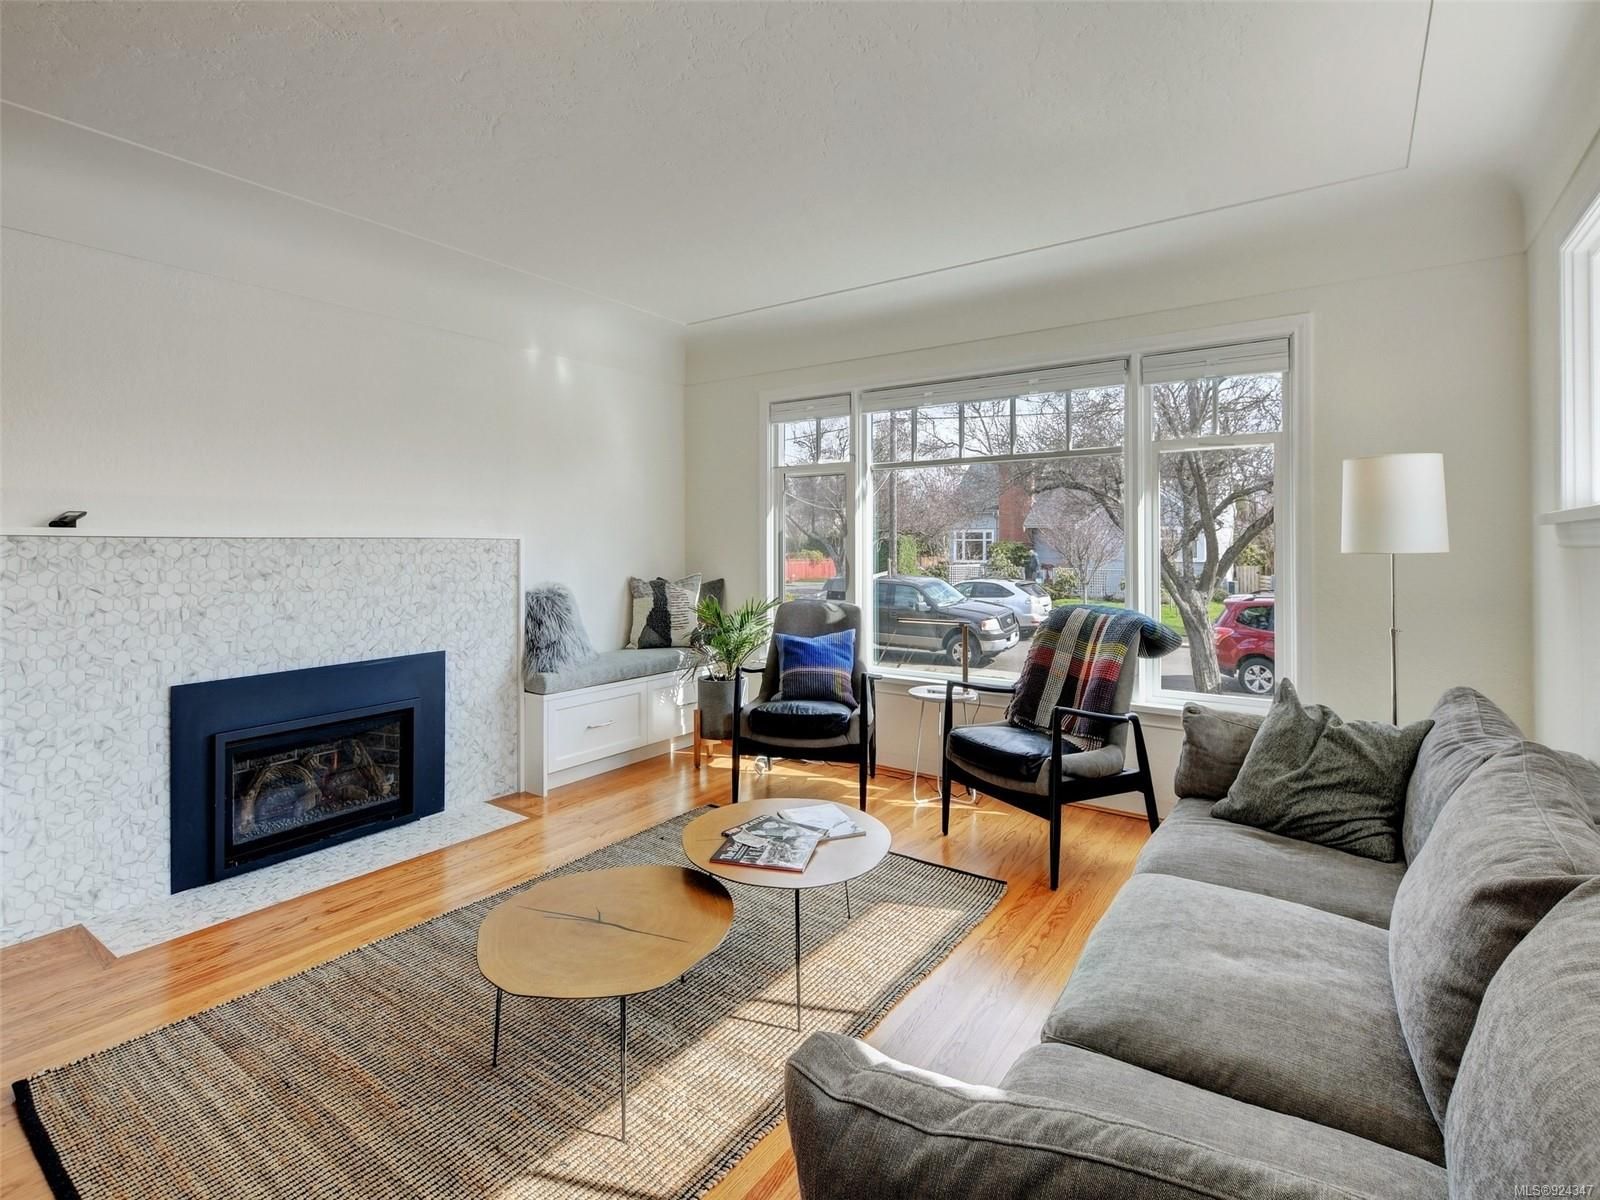 Open House. Open House on Saturday, March 18, 2023 2:30PM - 4:00PM
Charming family home in desirable Oak Bay! Endless updates with Original details of oak and fir floors, coved ceilings, and wood-burning fireplace with tons of natural light. Soapstone cou